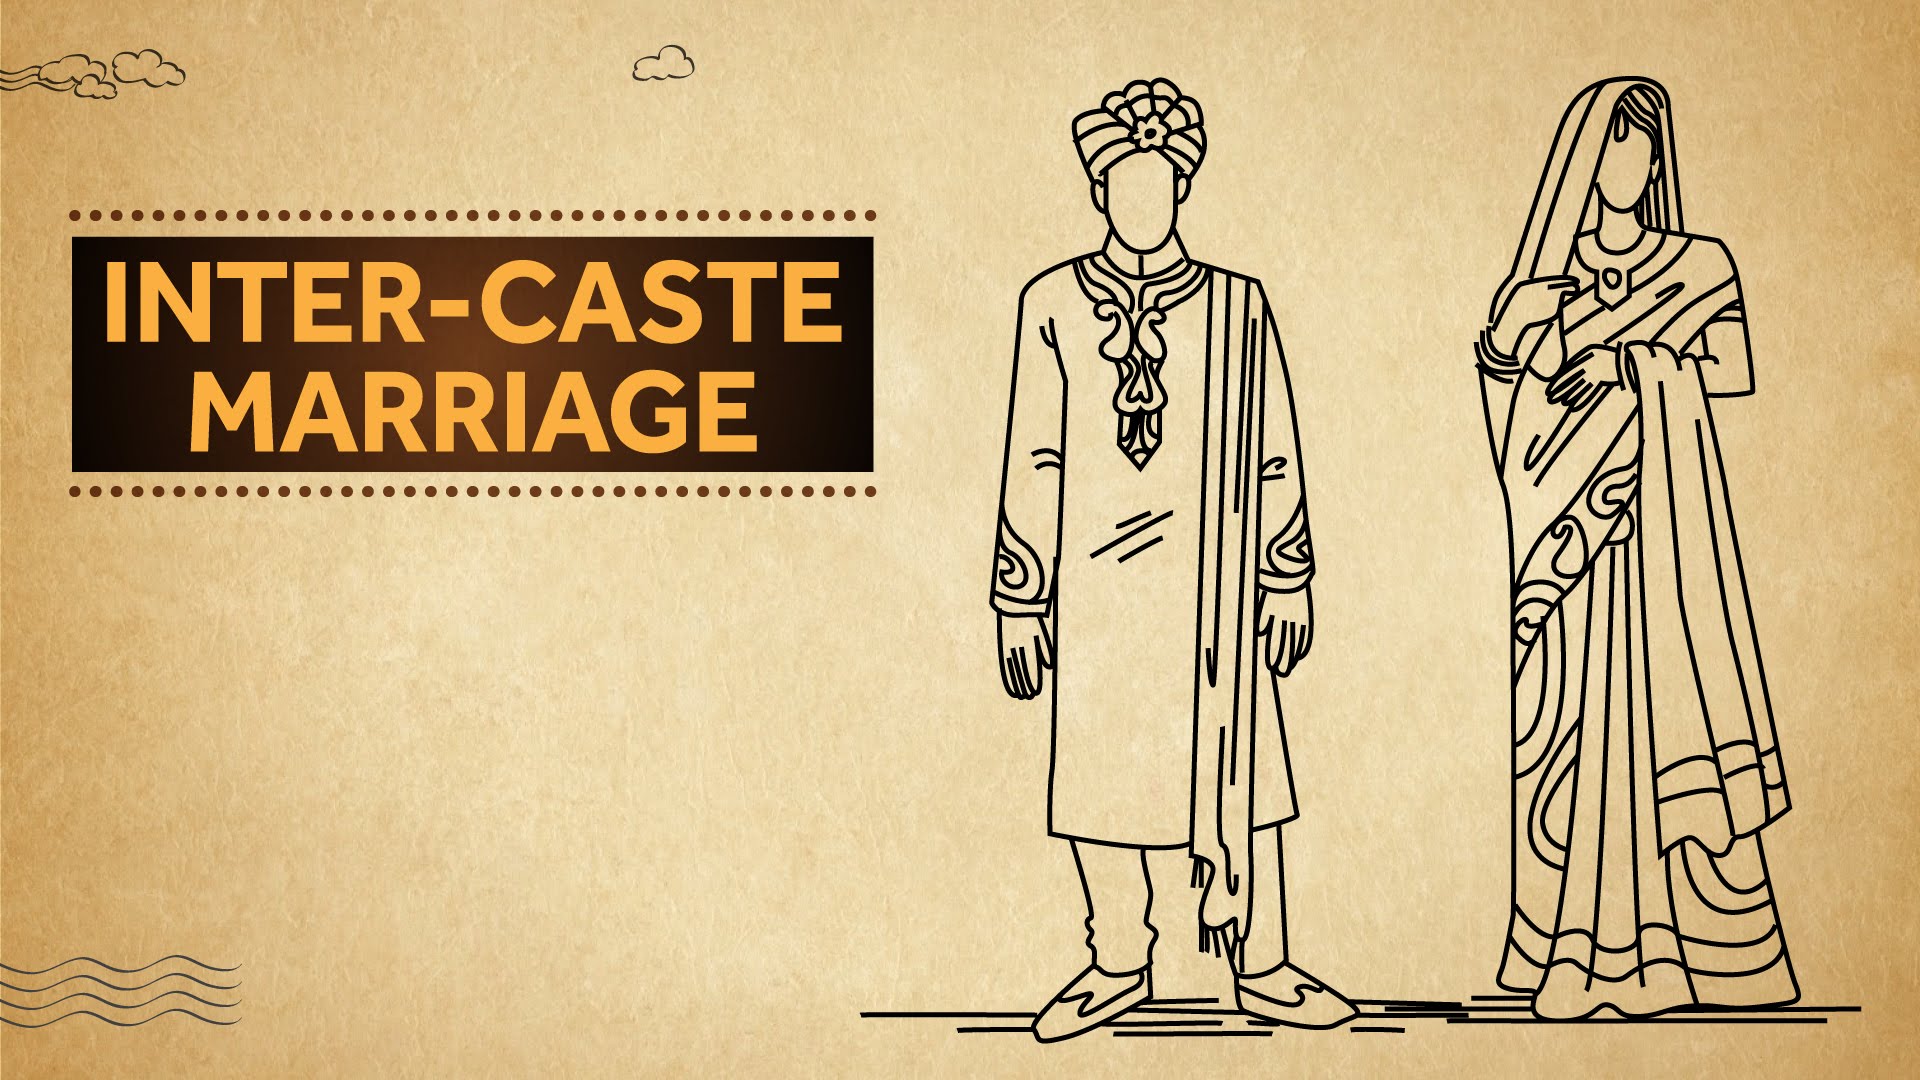 Inter-caste Marriages are not a curse.